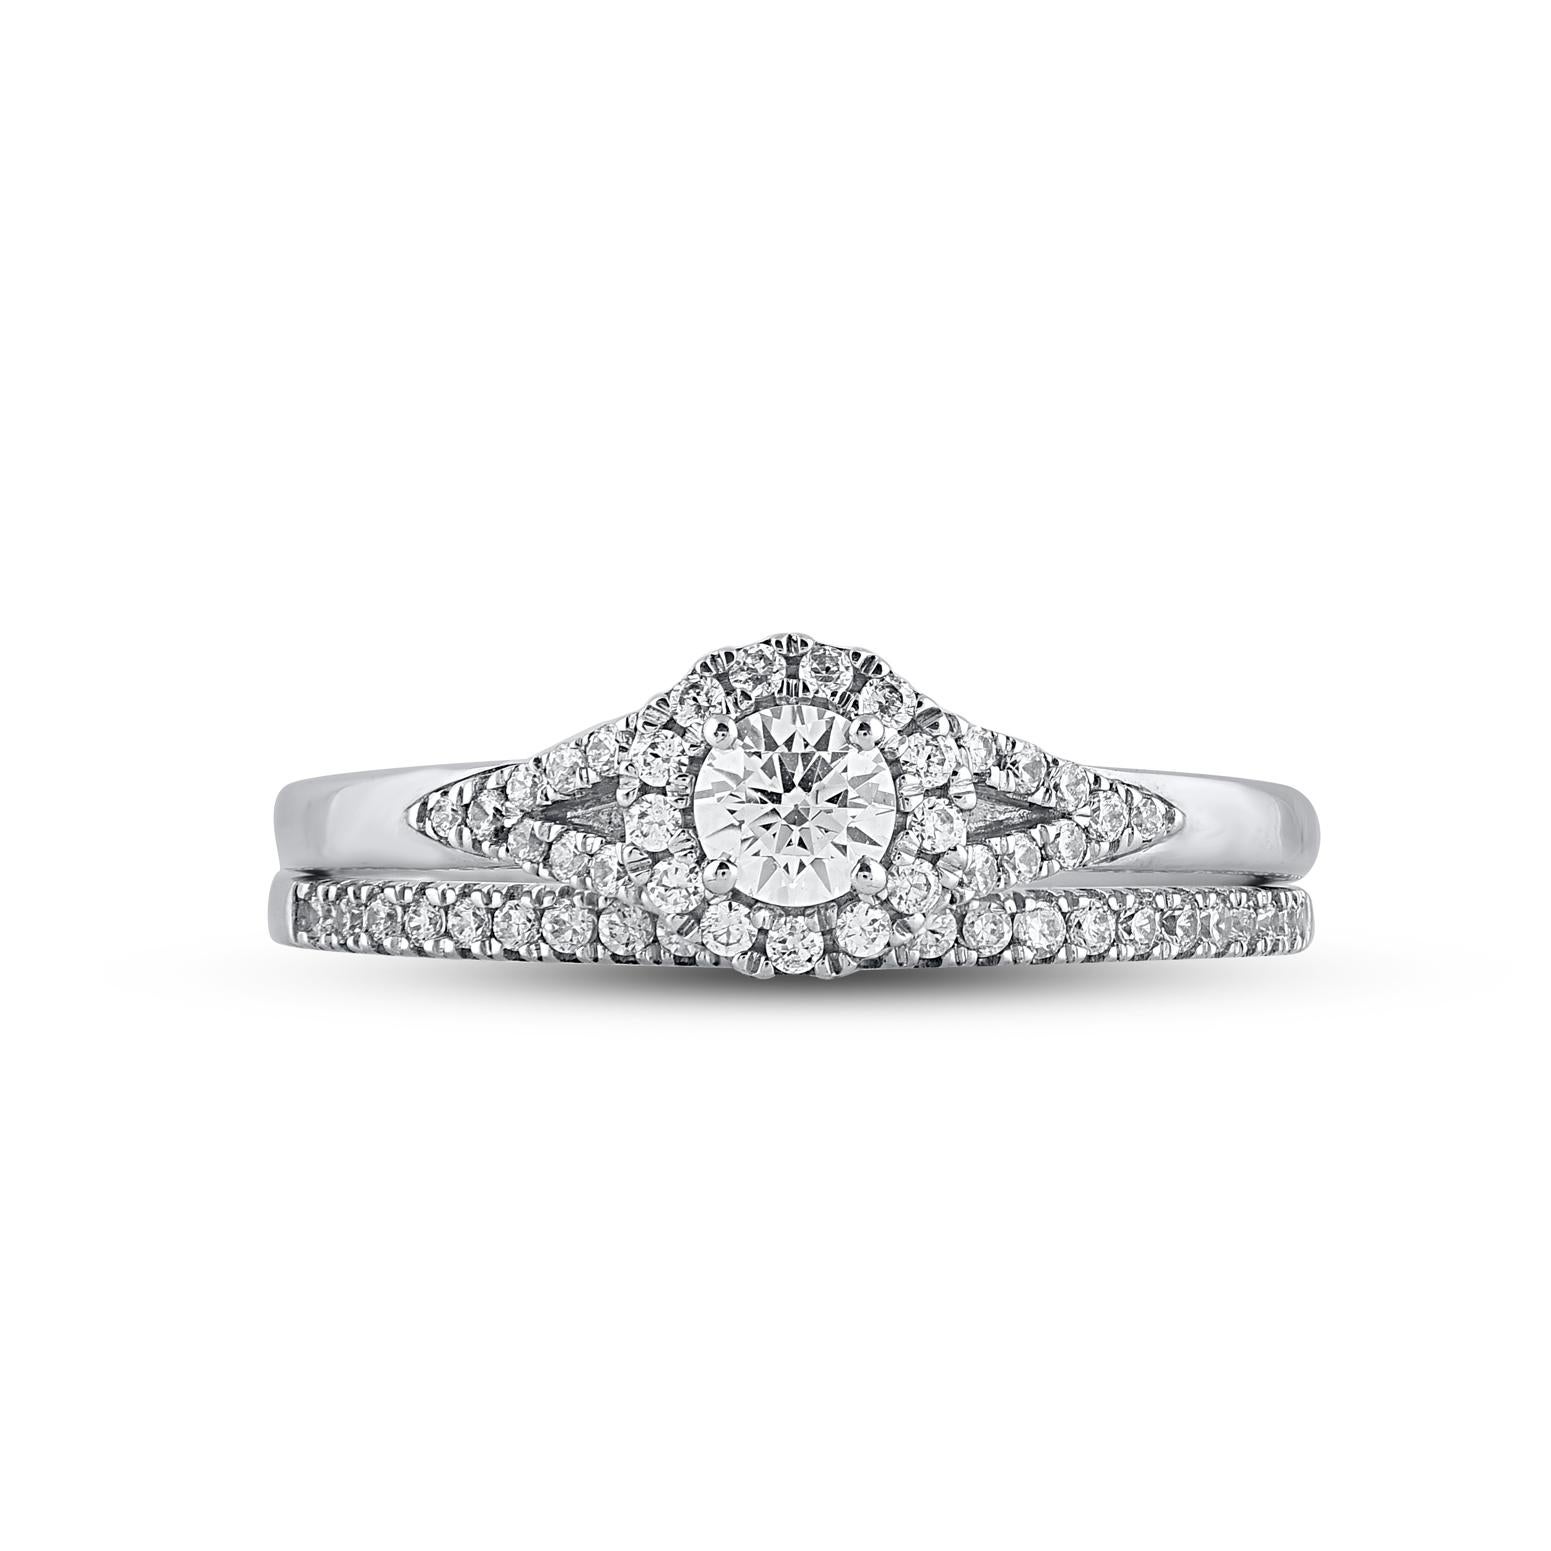 On that special day, express all your love with this elegant and dazzling diamond bridal set. Crafted in 14 Karat white gold. This wedding ring features a sparkling 53 brilliant cut and single cut round diamond beautifully set in prong setting. The